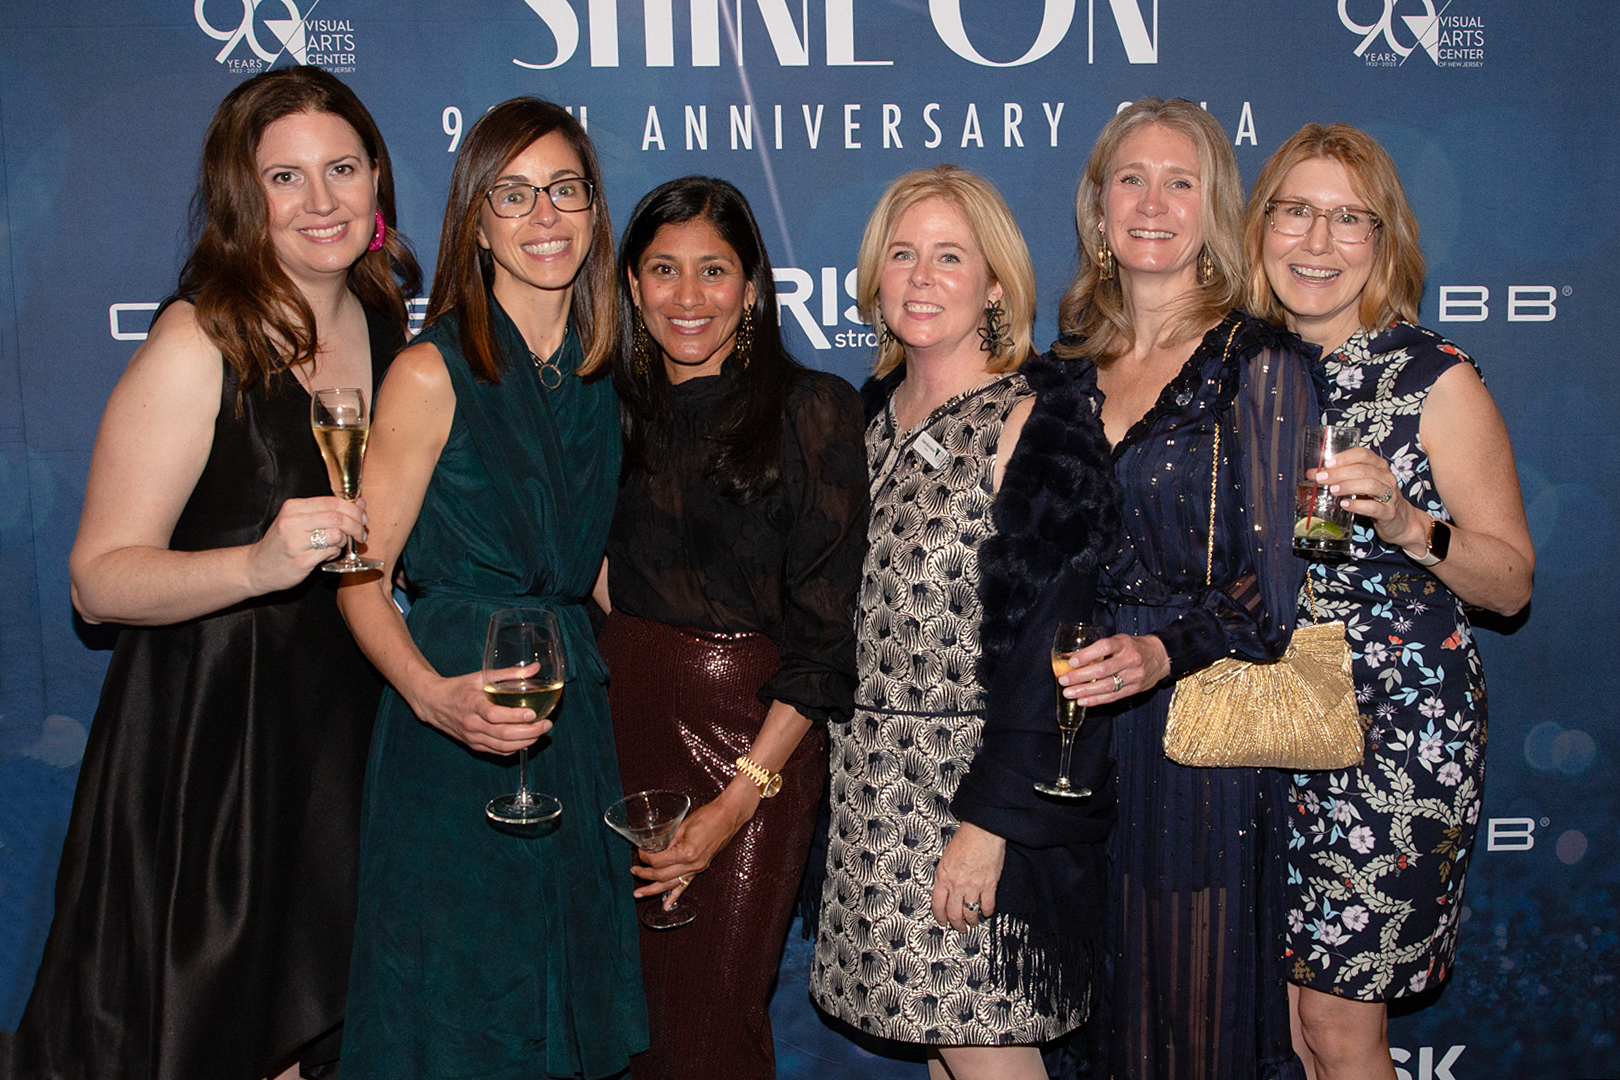 From left to right: Ana Robic, Cristina Sierra, Anita Bobba, Kate Buchanan, Suzanne Henry, and Jill Bray at VACNJ Annual Gala